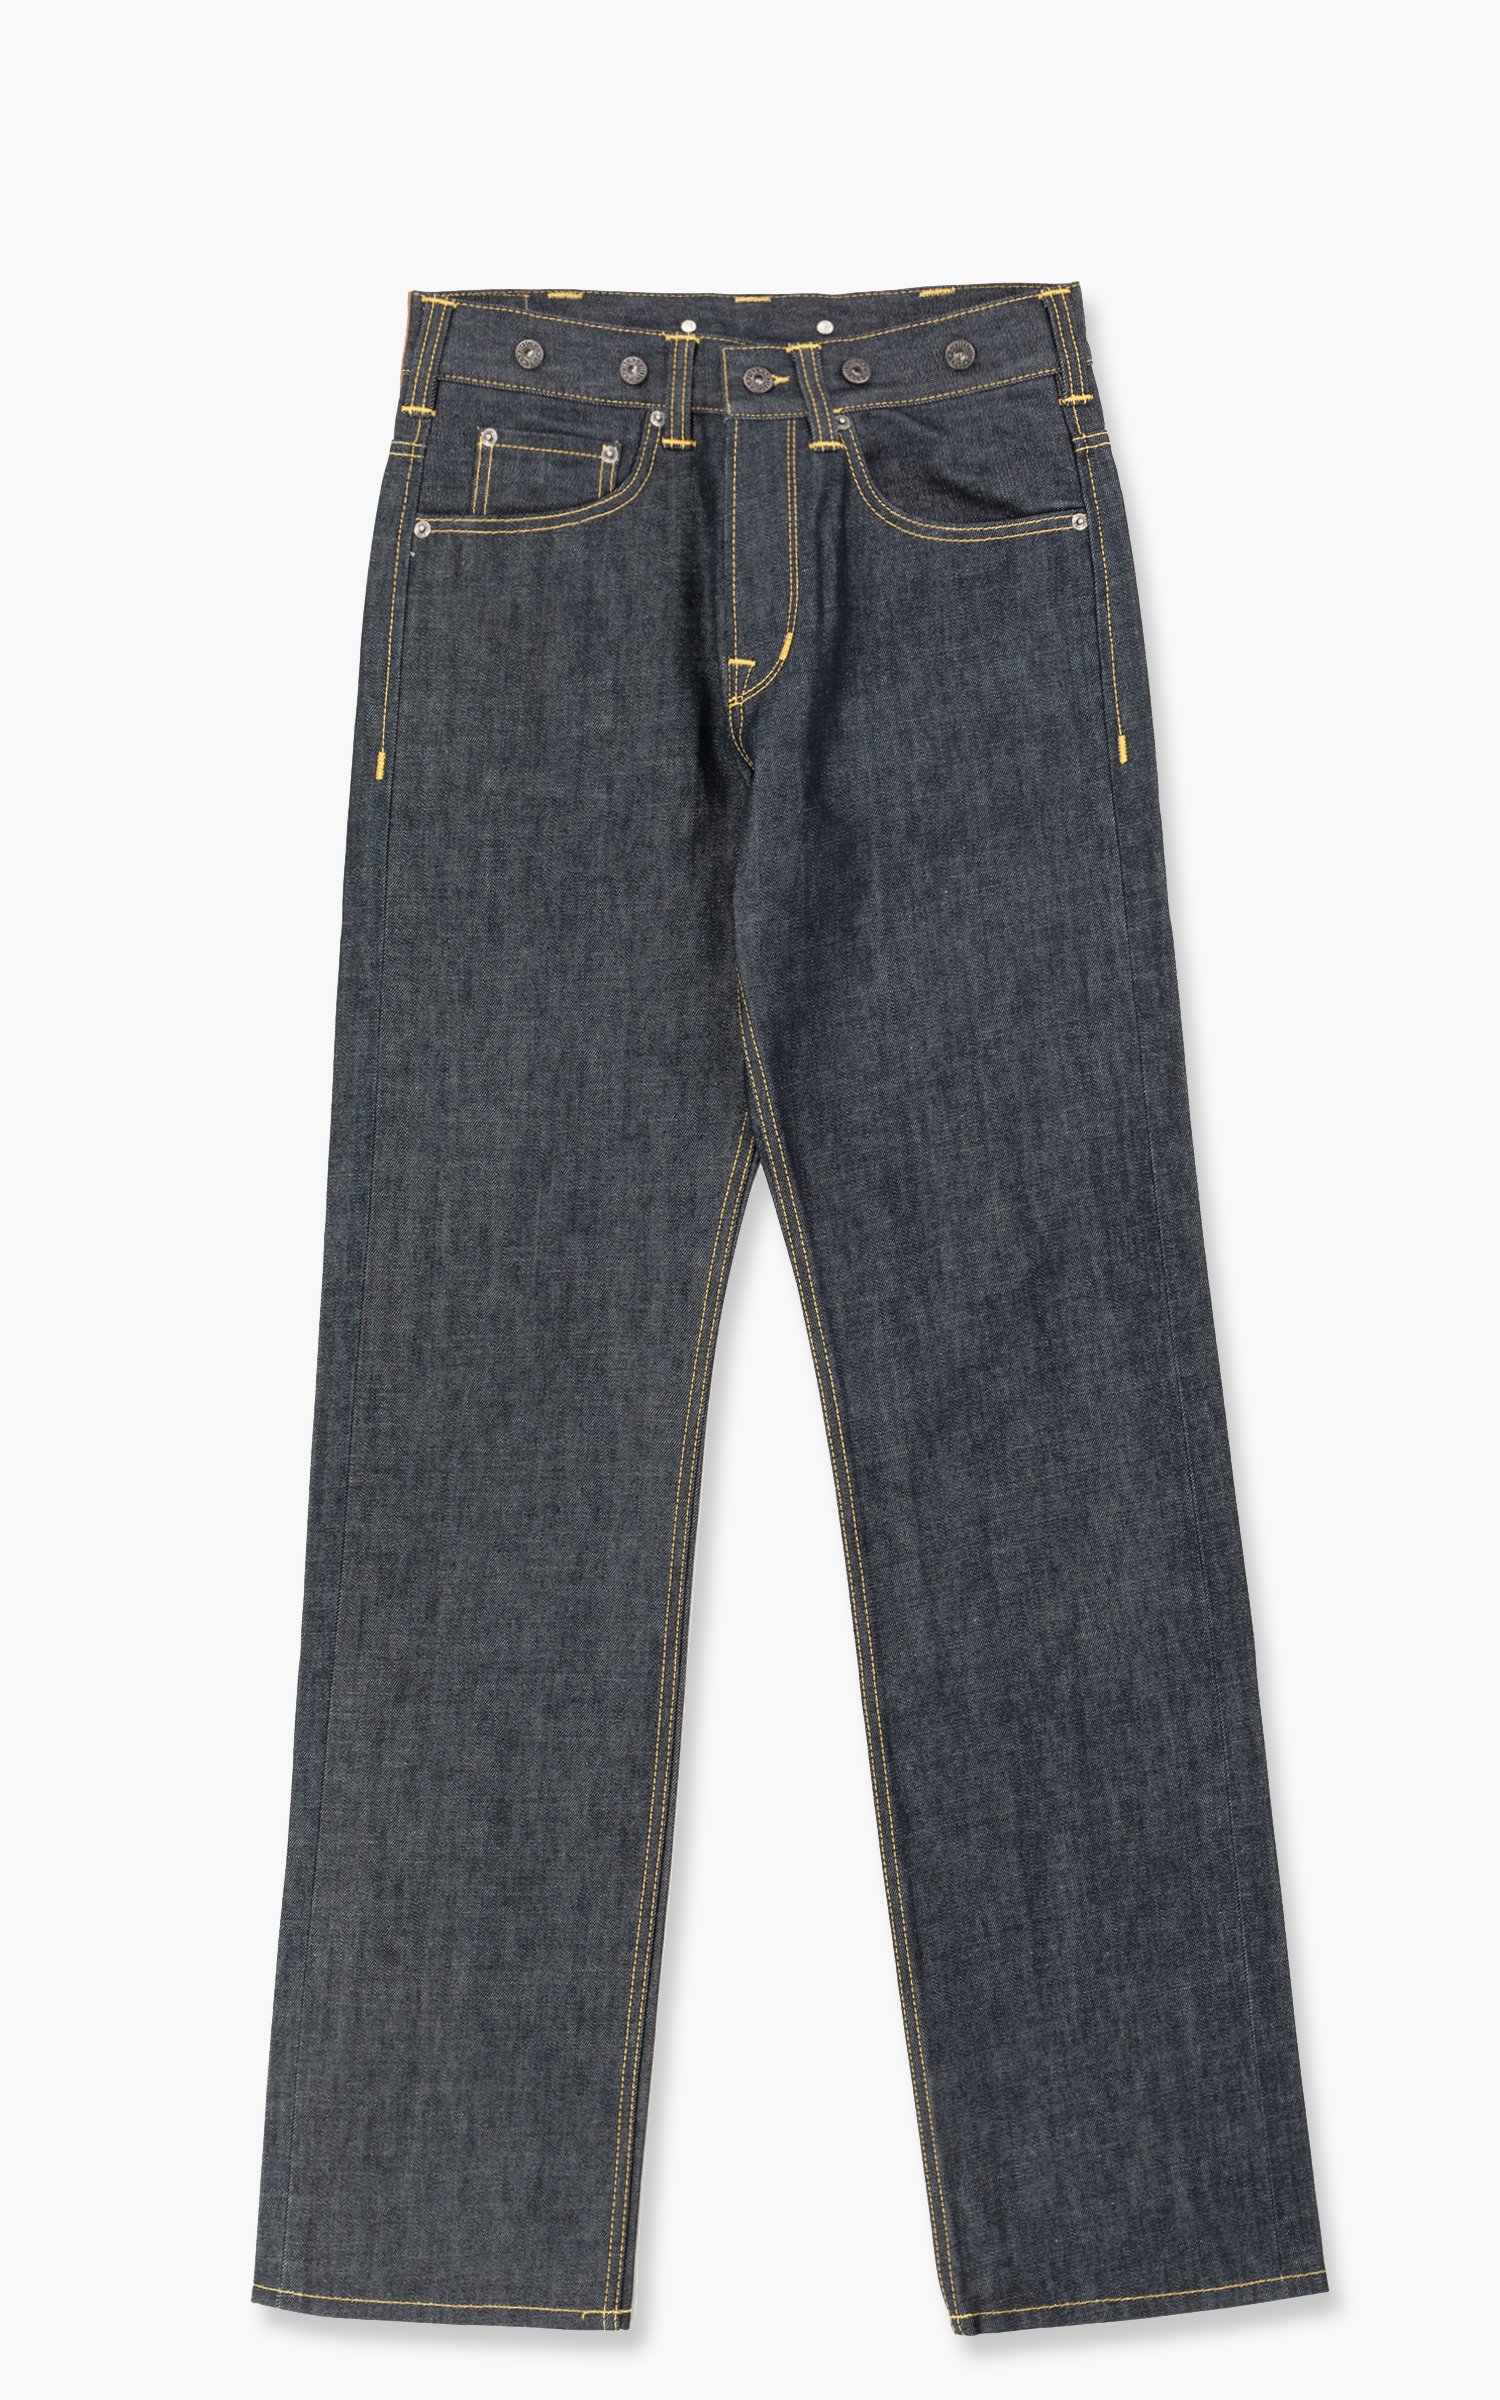 Pike Brothers 1937 Roamer Pant 11oz | Cultizm